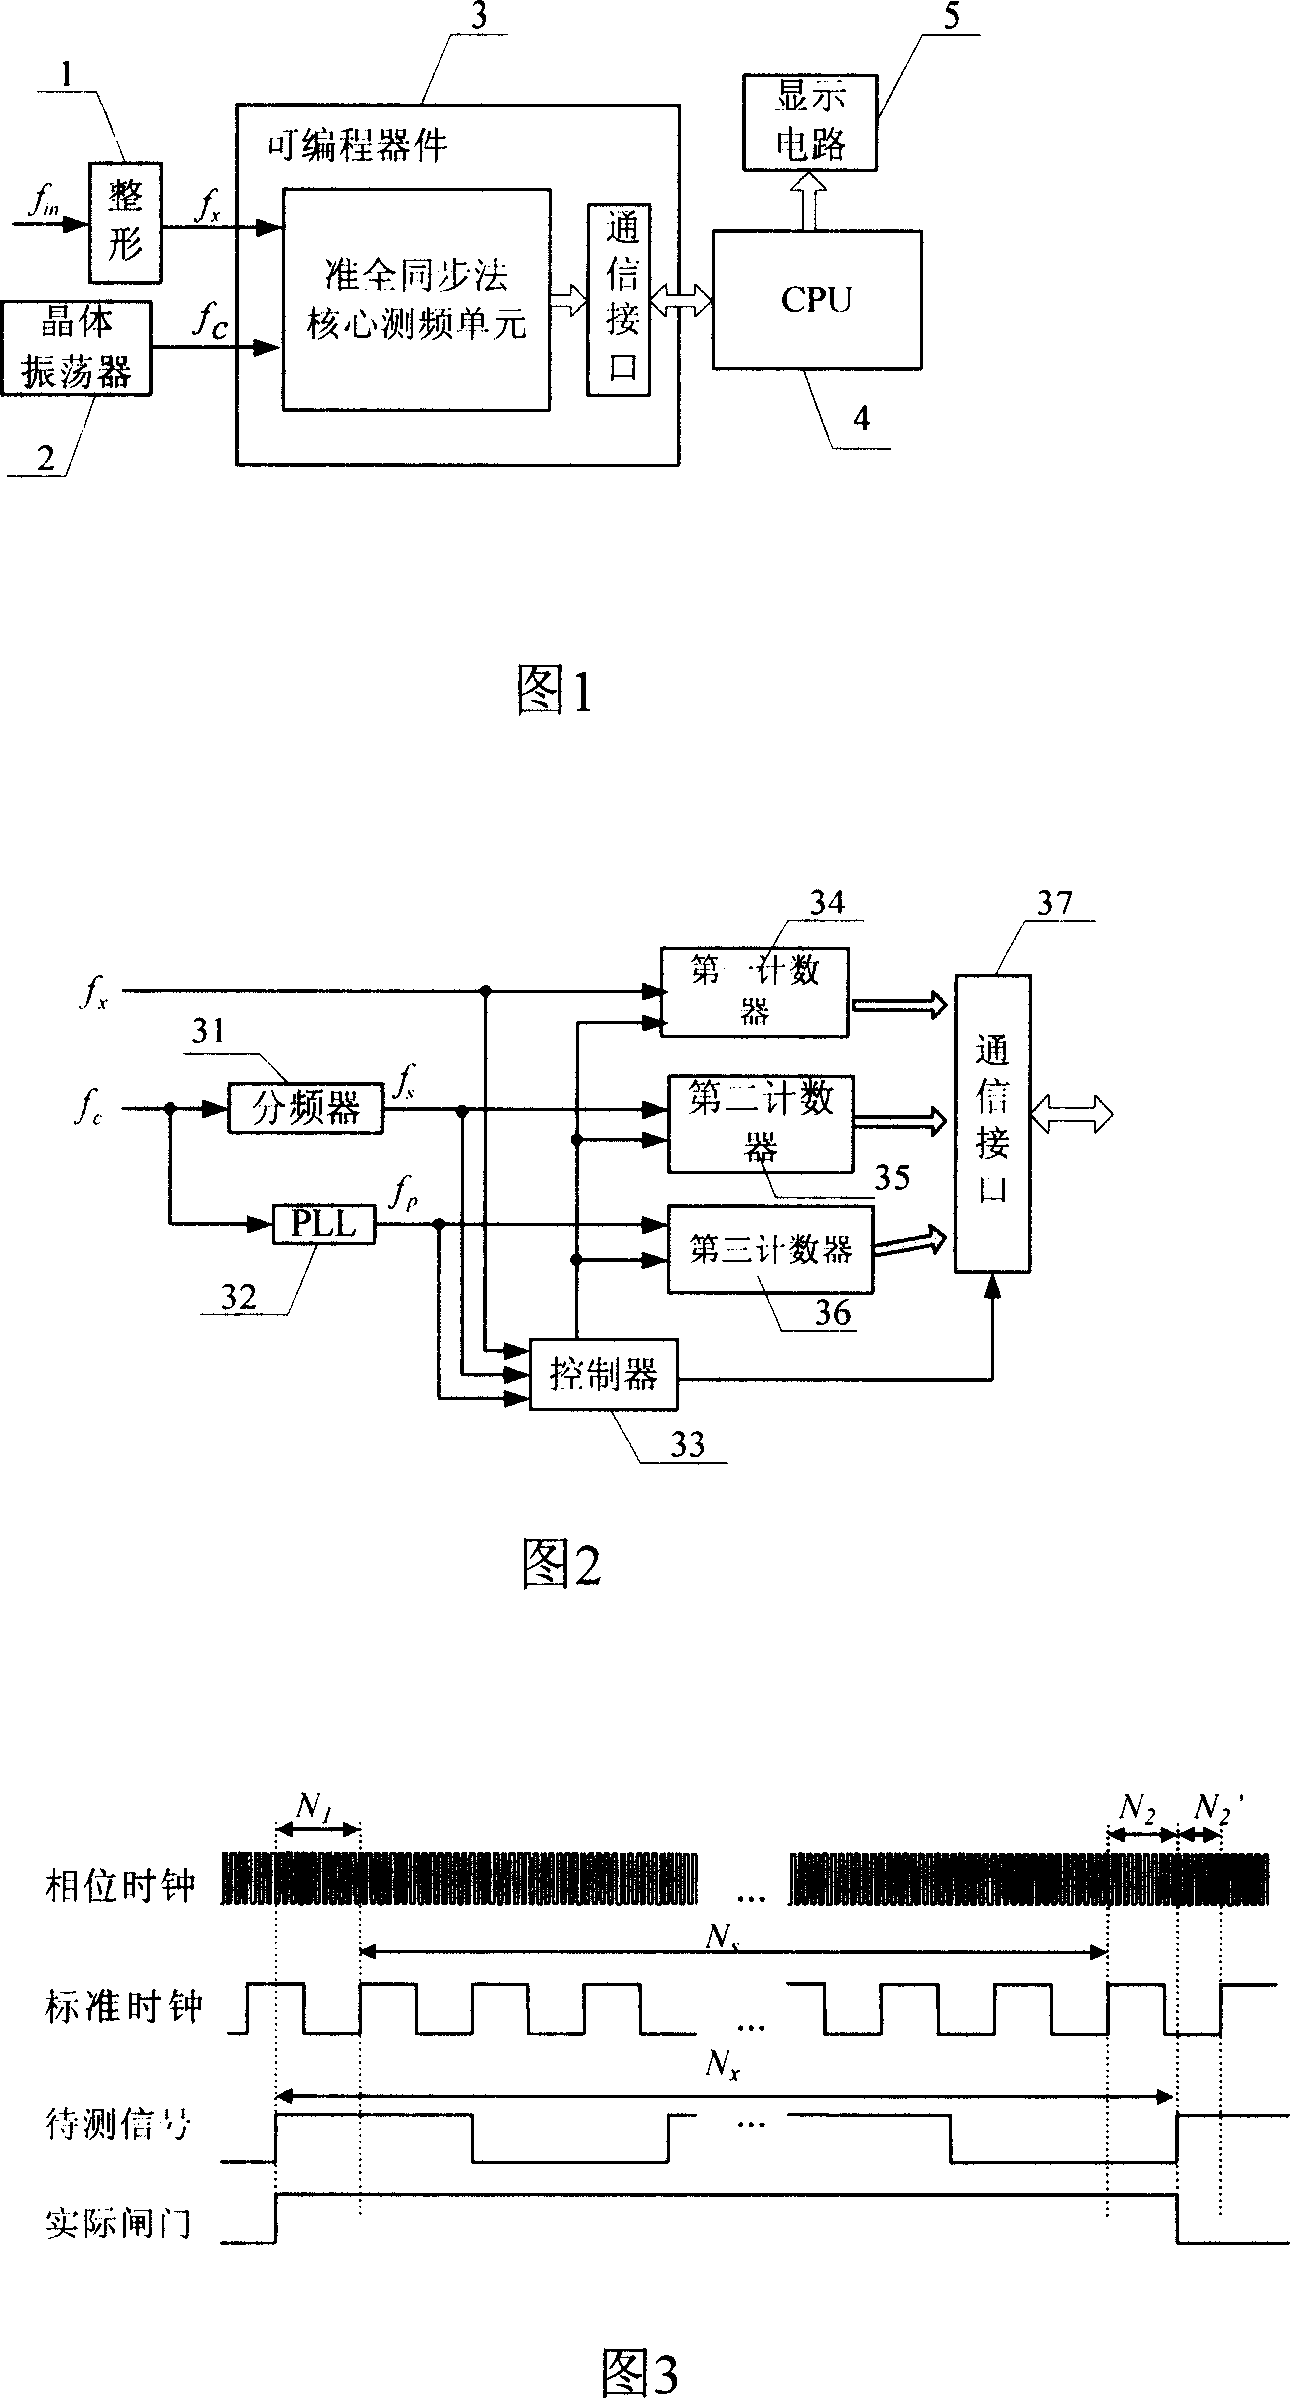 Quasi full-synchronous high-precision rapid frequency measuring device and method